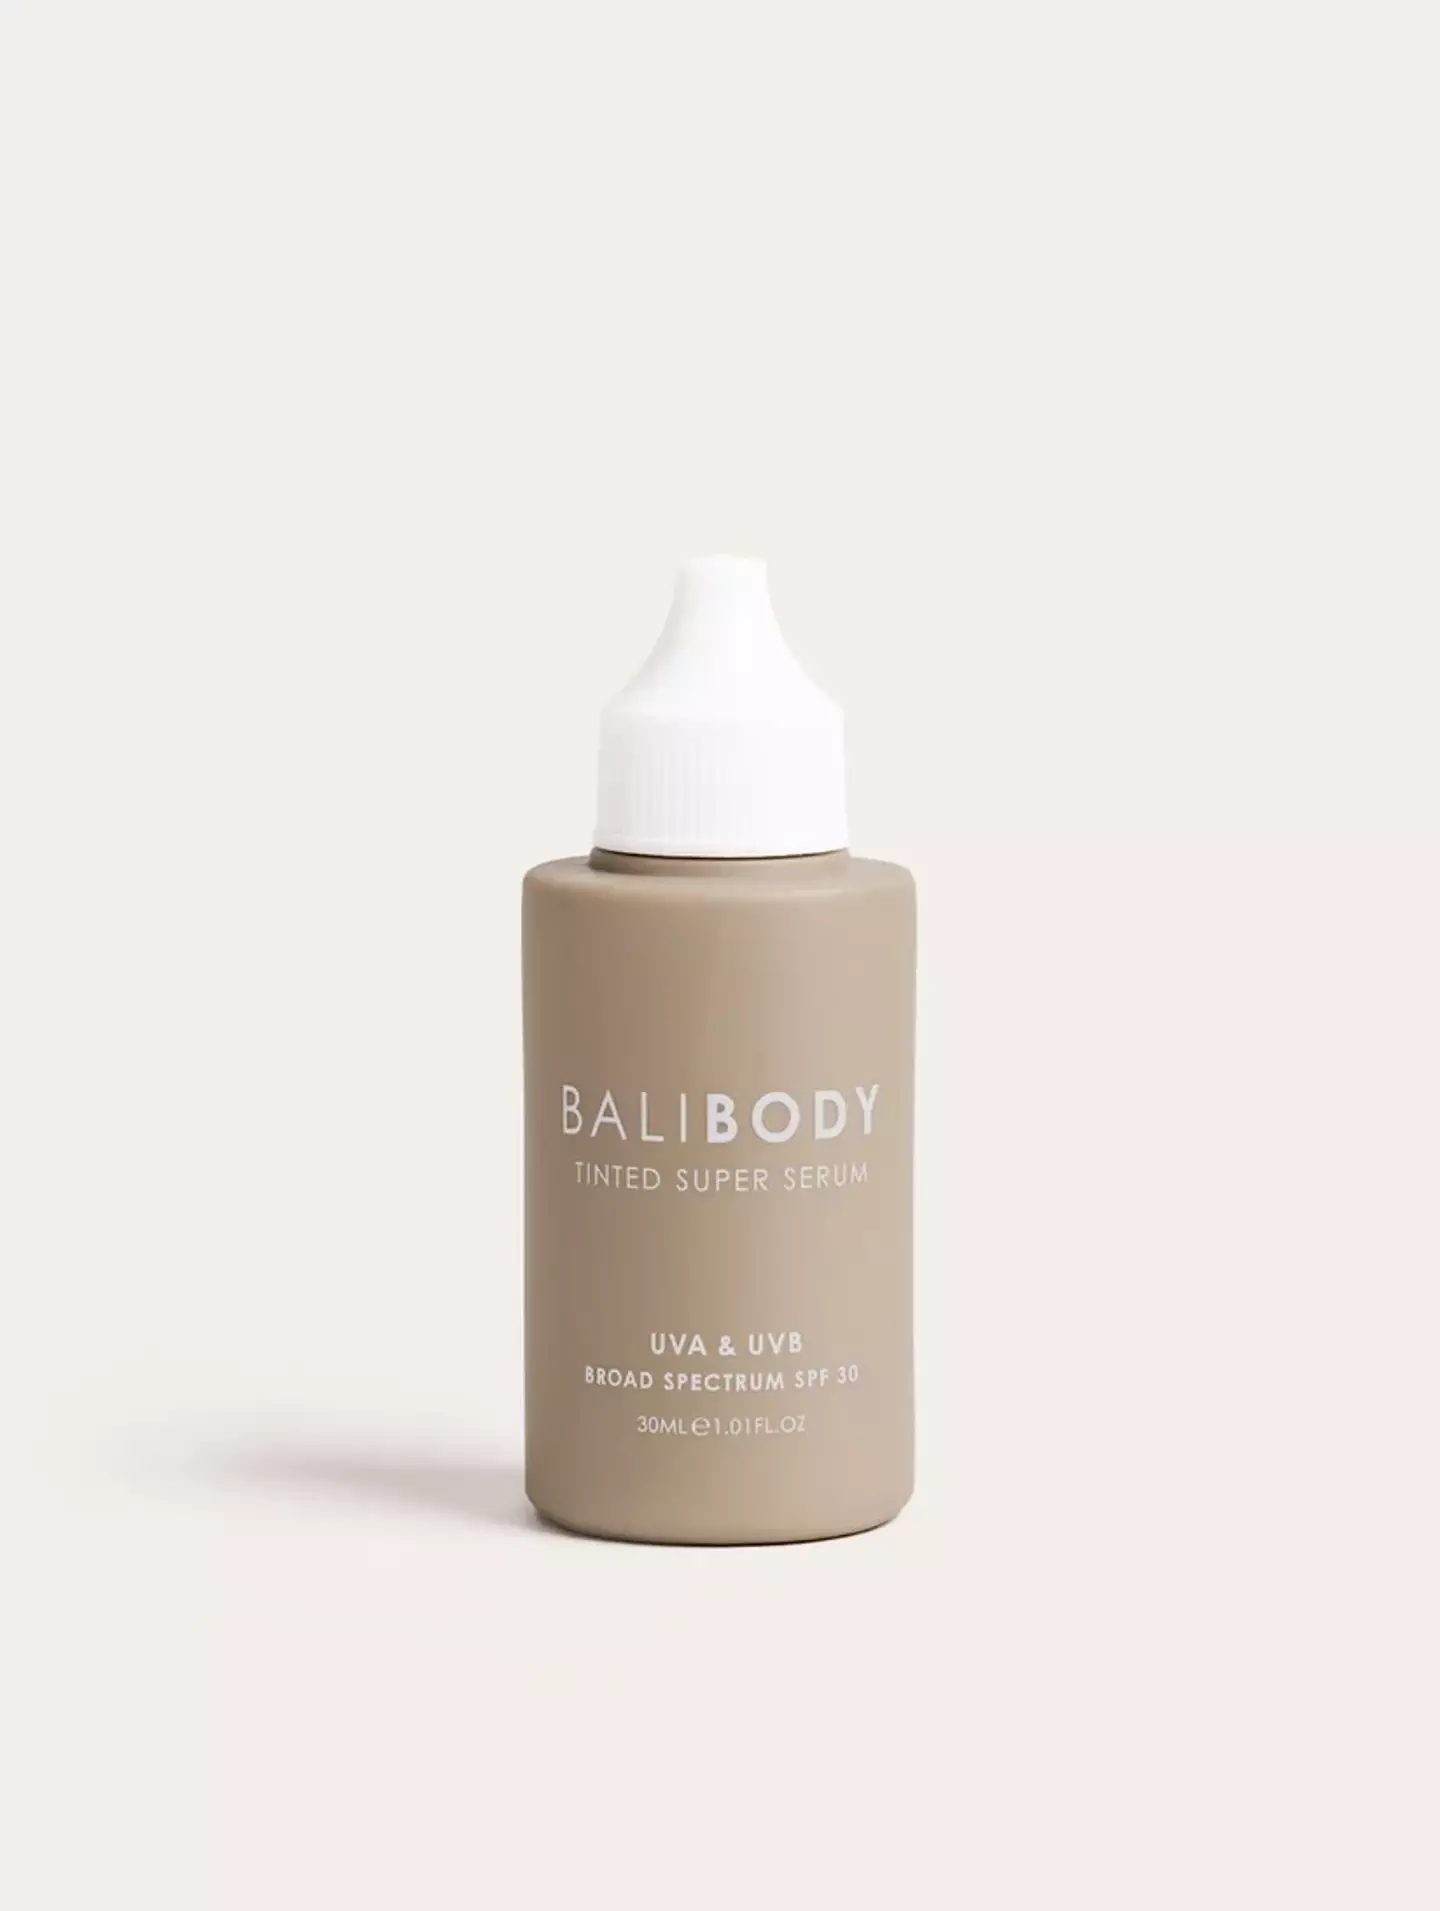 The Bali Body Tinted Super Serum SPF30 sold out but is now back in stock.